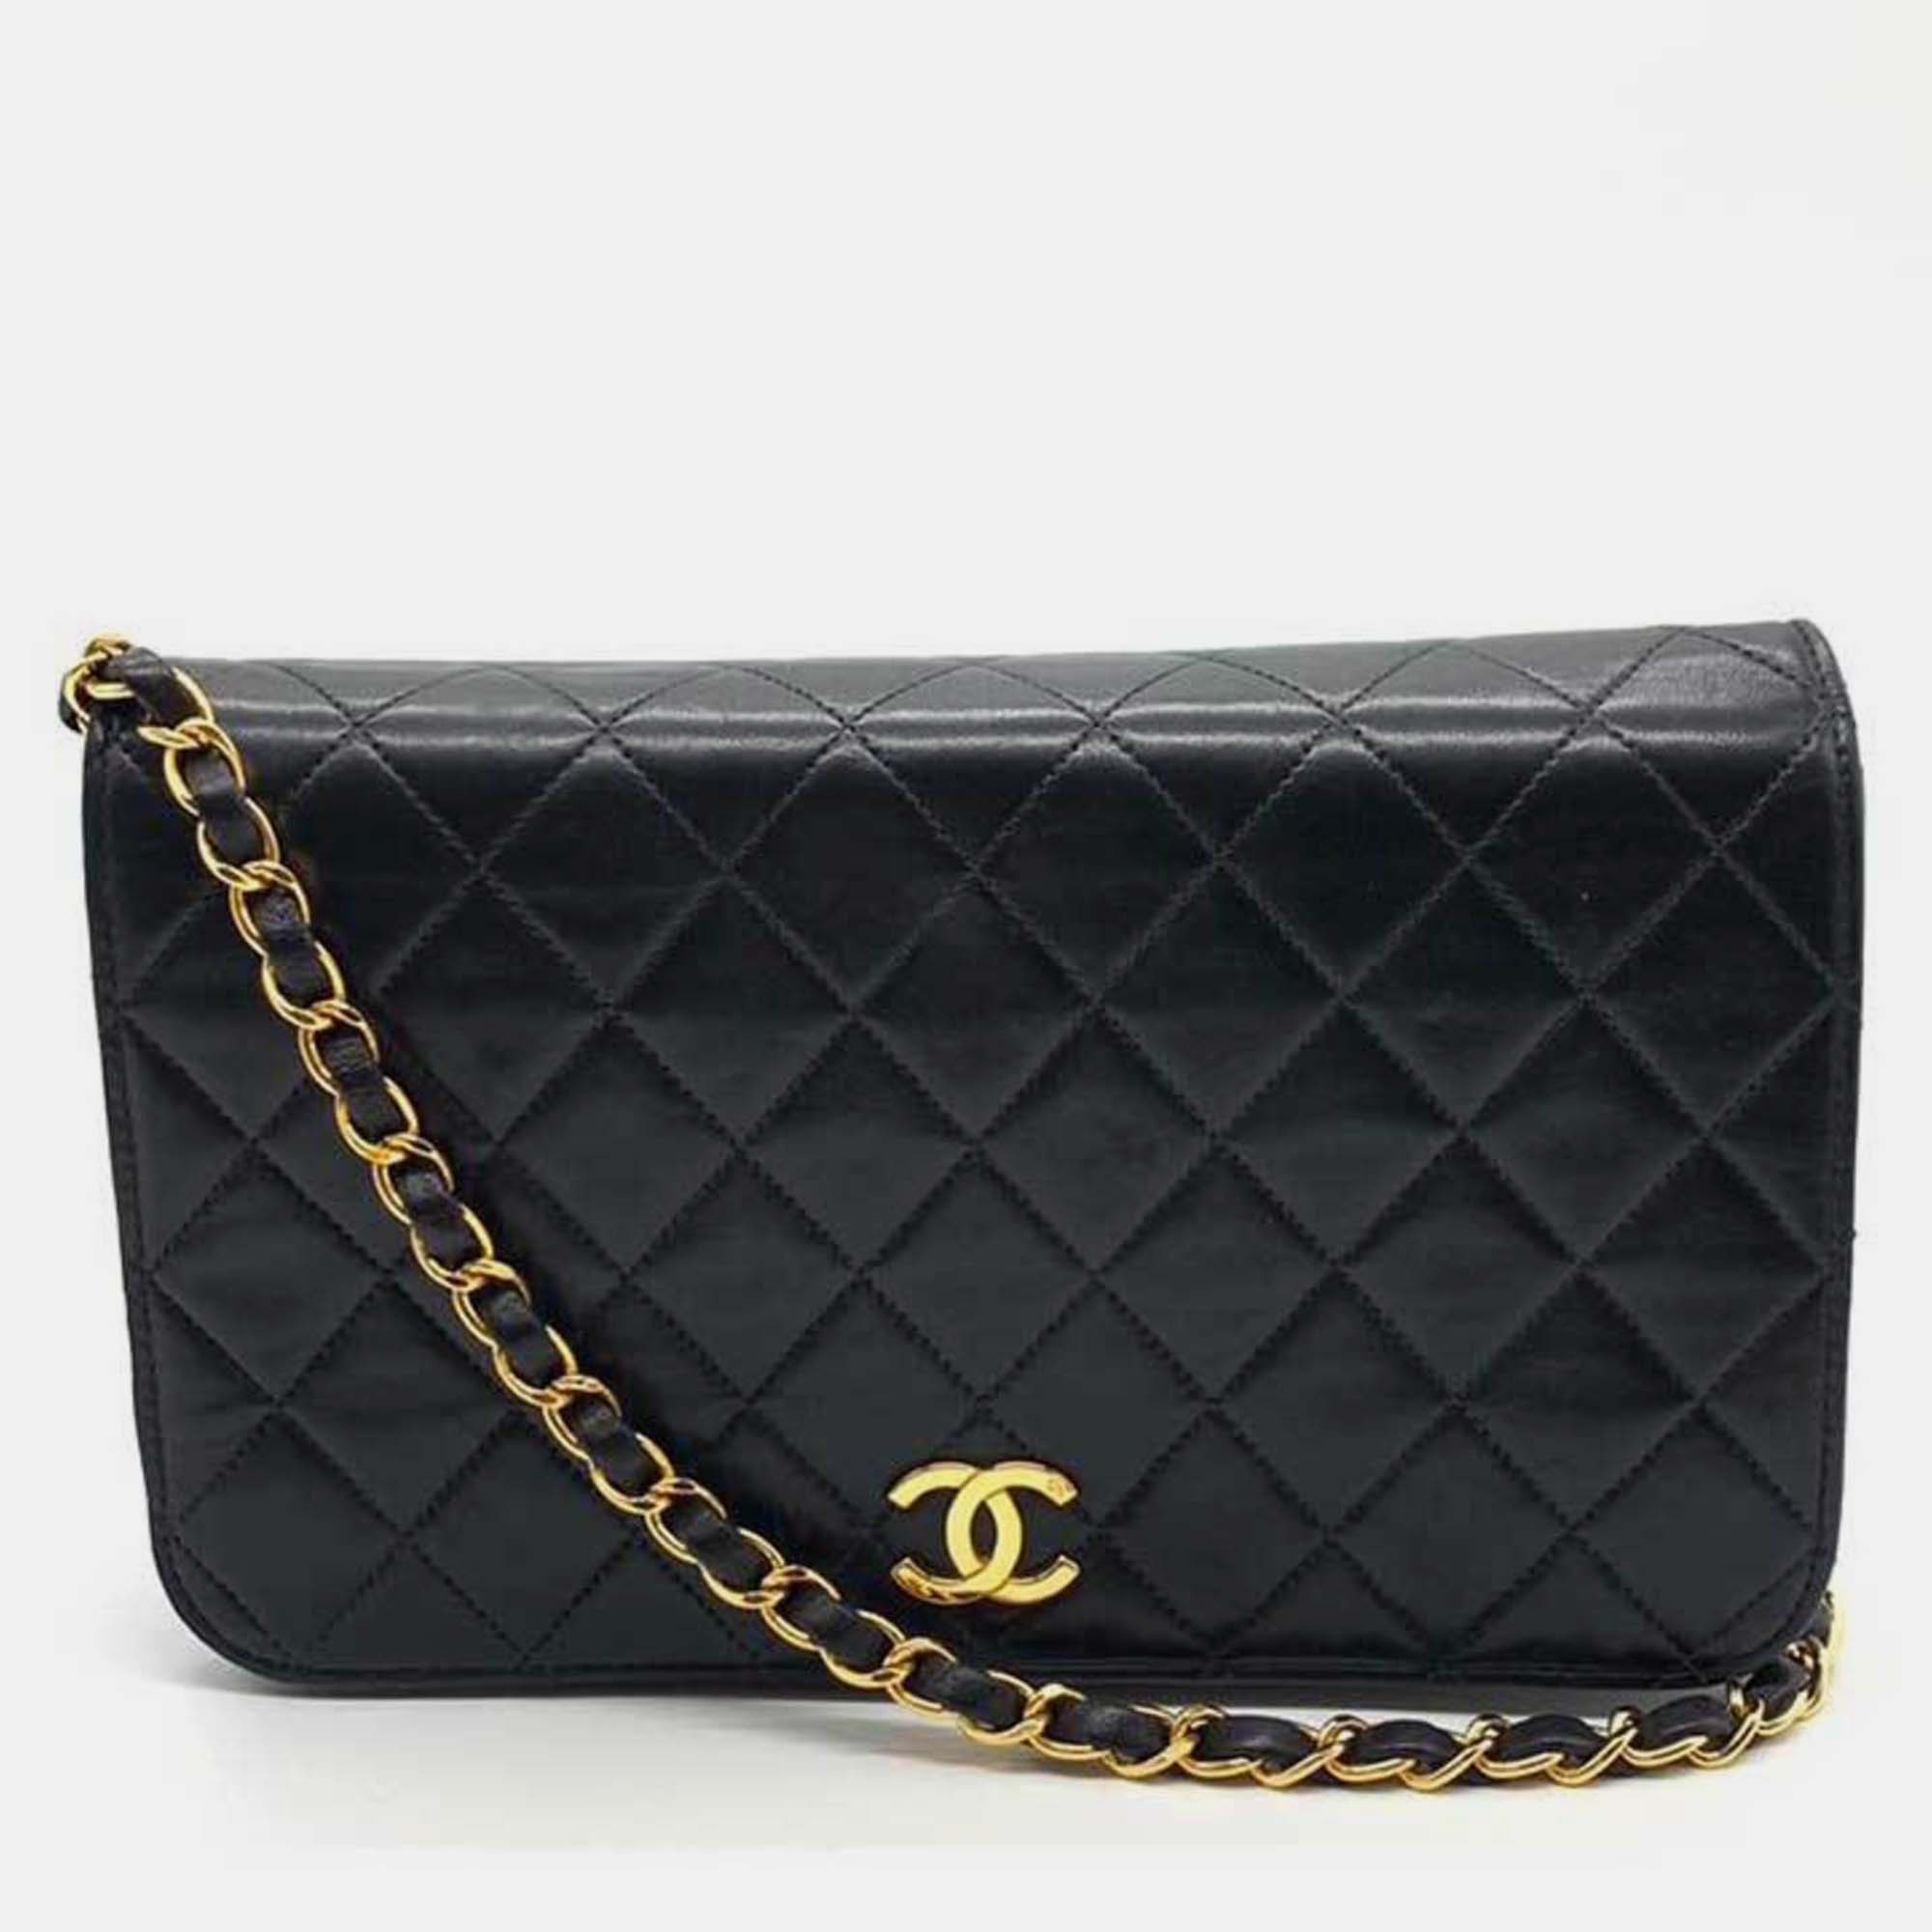 

Chanel Black Lambskin Leather Quilted Full Flap Bag